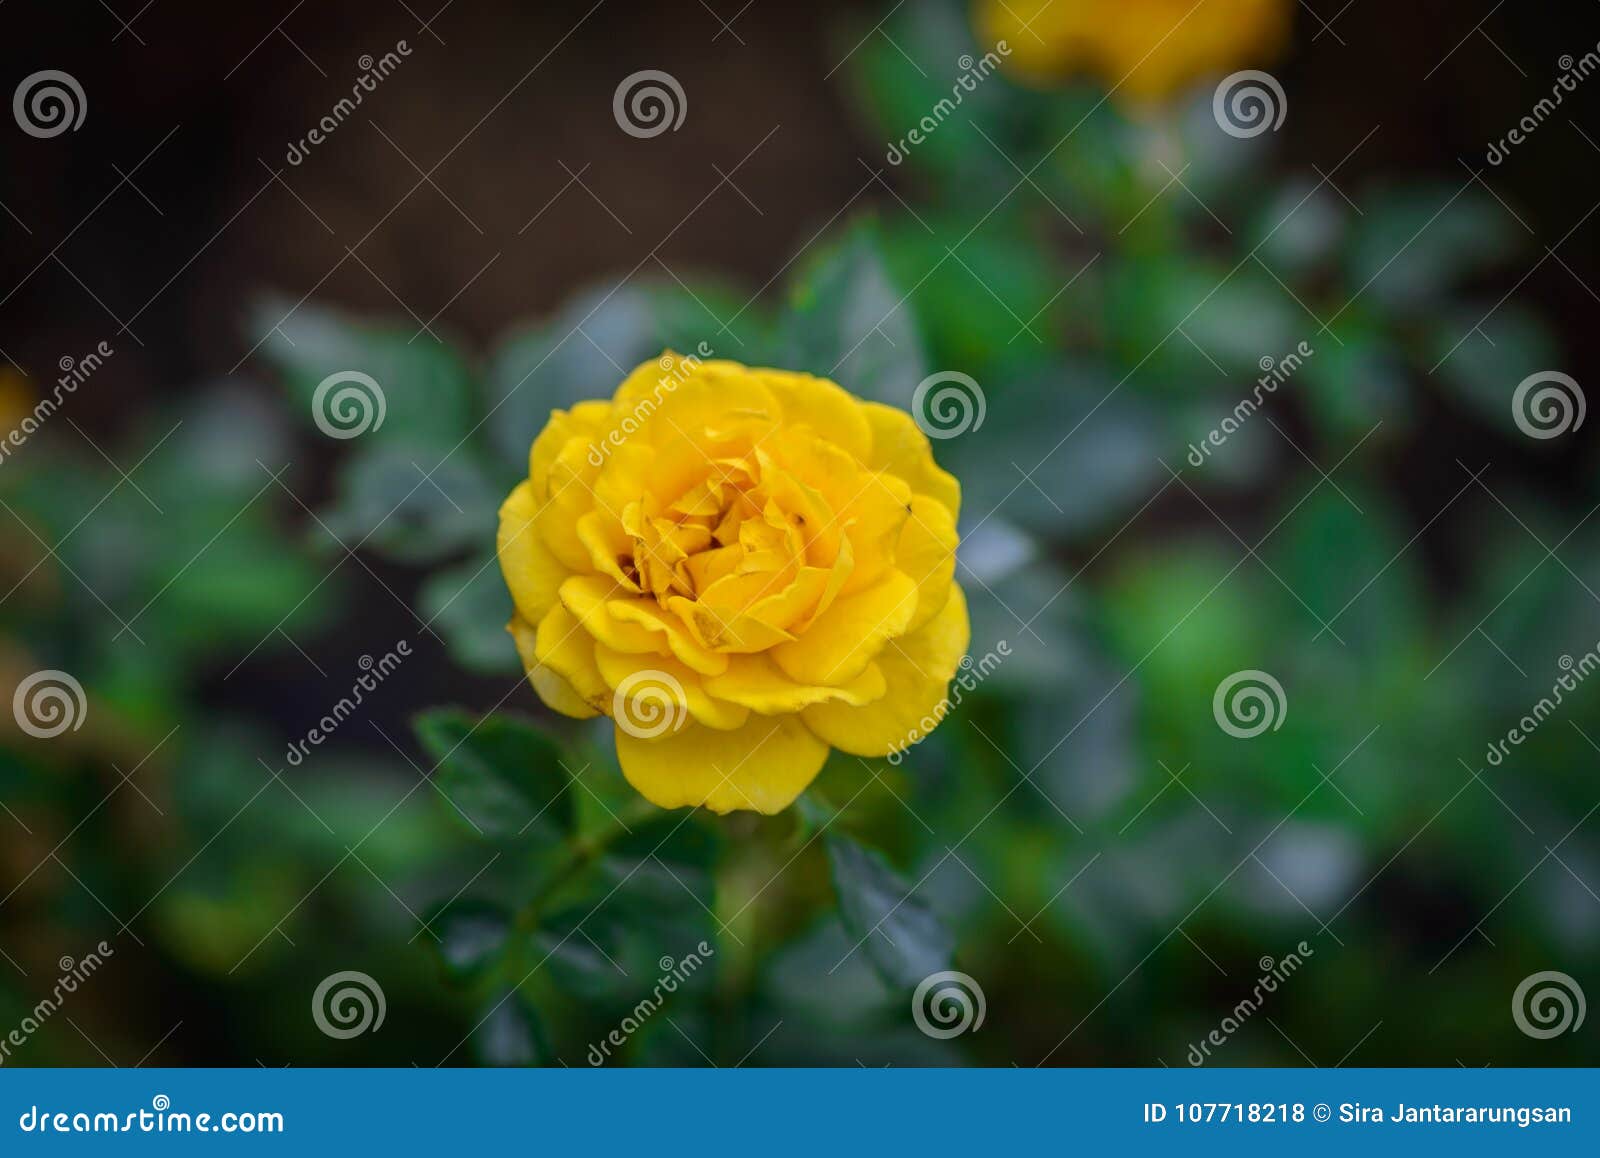 Rose With Buds In A Romantic Flower Garden Stock Photo Image Of